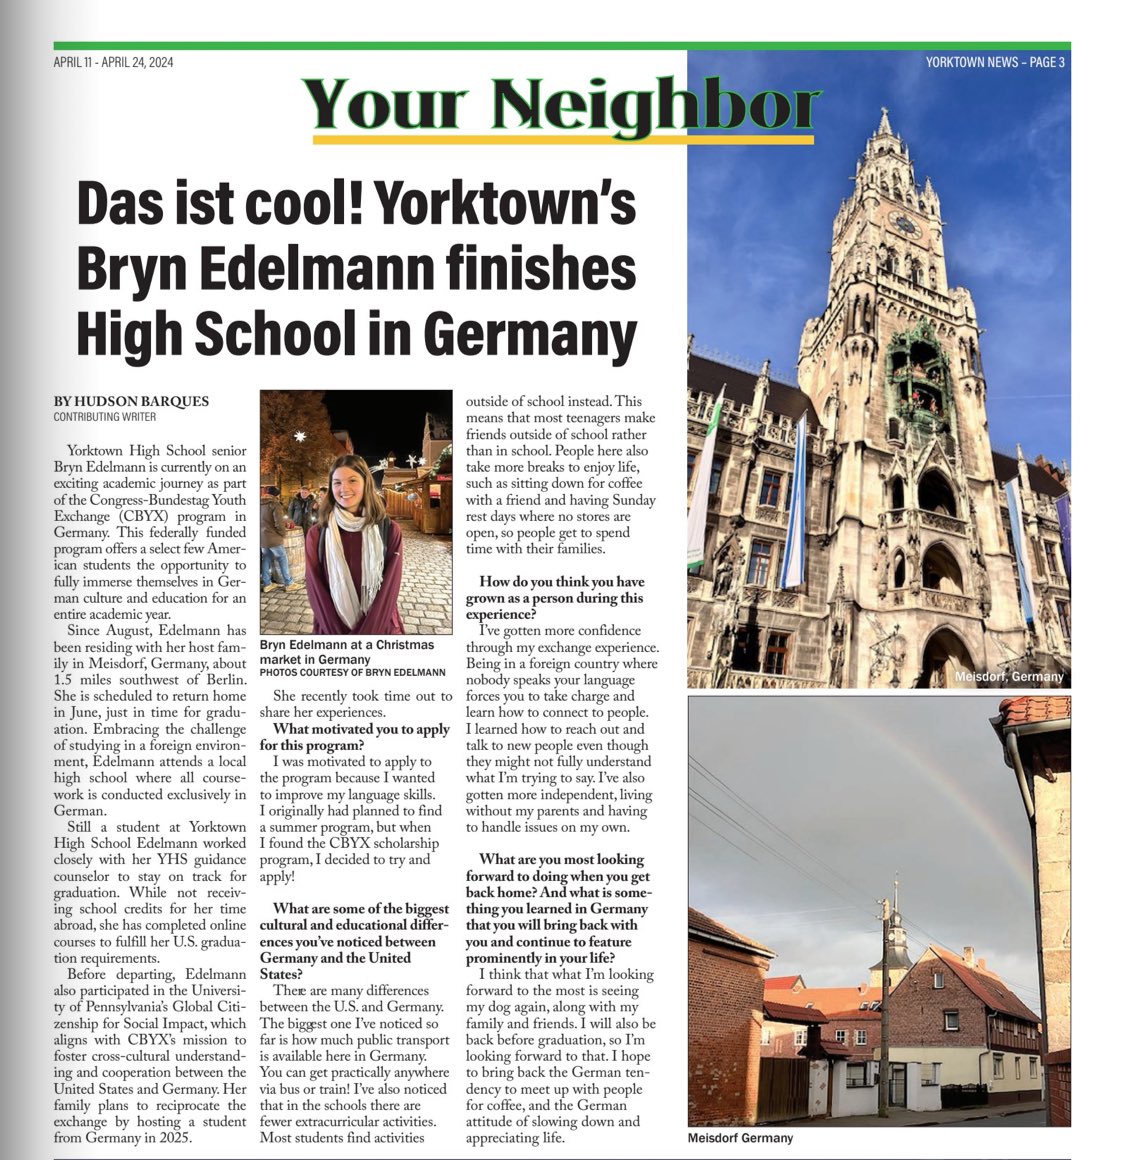 Terrific article in @YorktownNews featuring the incredible educational experience @YClassof2024 Bryn Edelmann is having in Germany. Looking forward to welcoming her back to YHS & hearing more about it🌽 #WorldwideHuskers @YHSNYGuidance @VGarretteYHS @CCriscioneYHS @GOLLISZJOHN